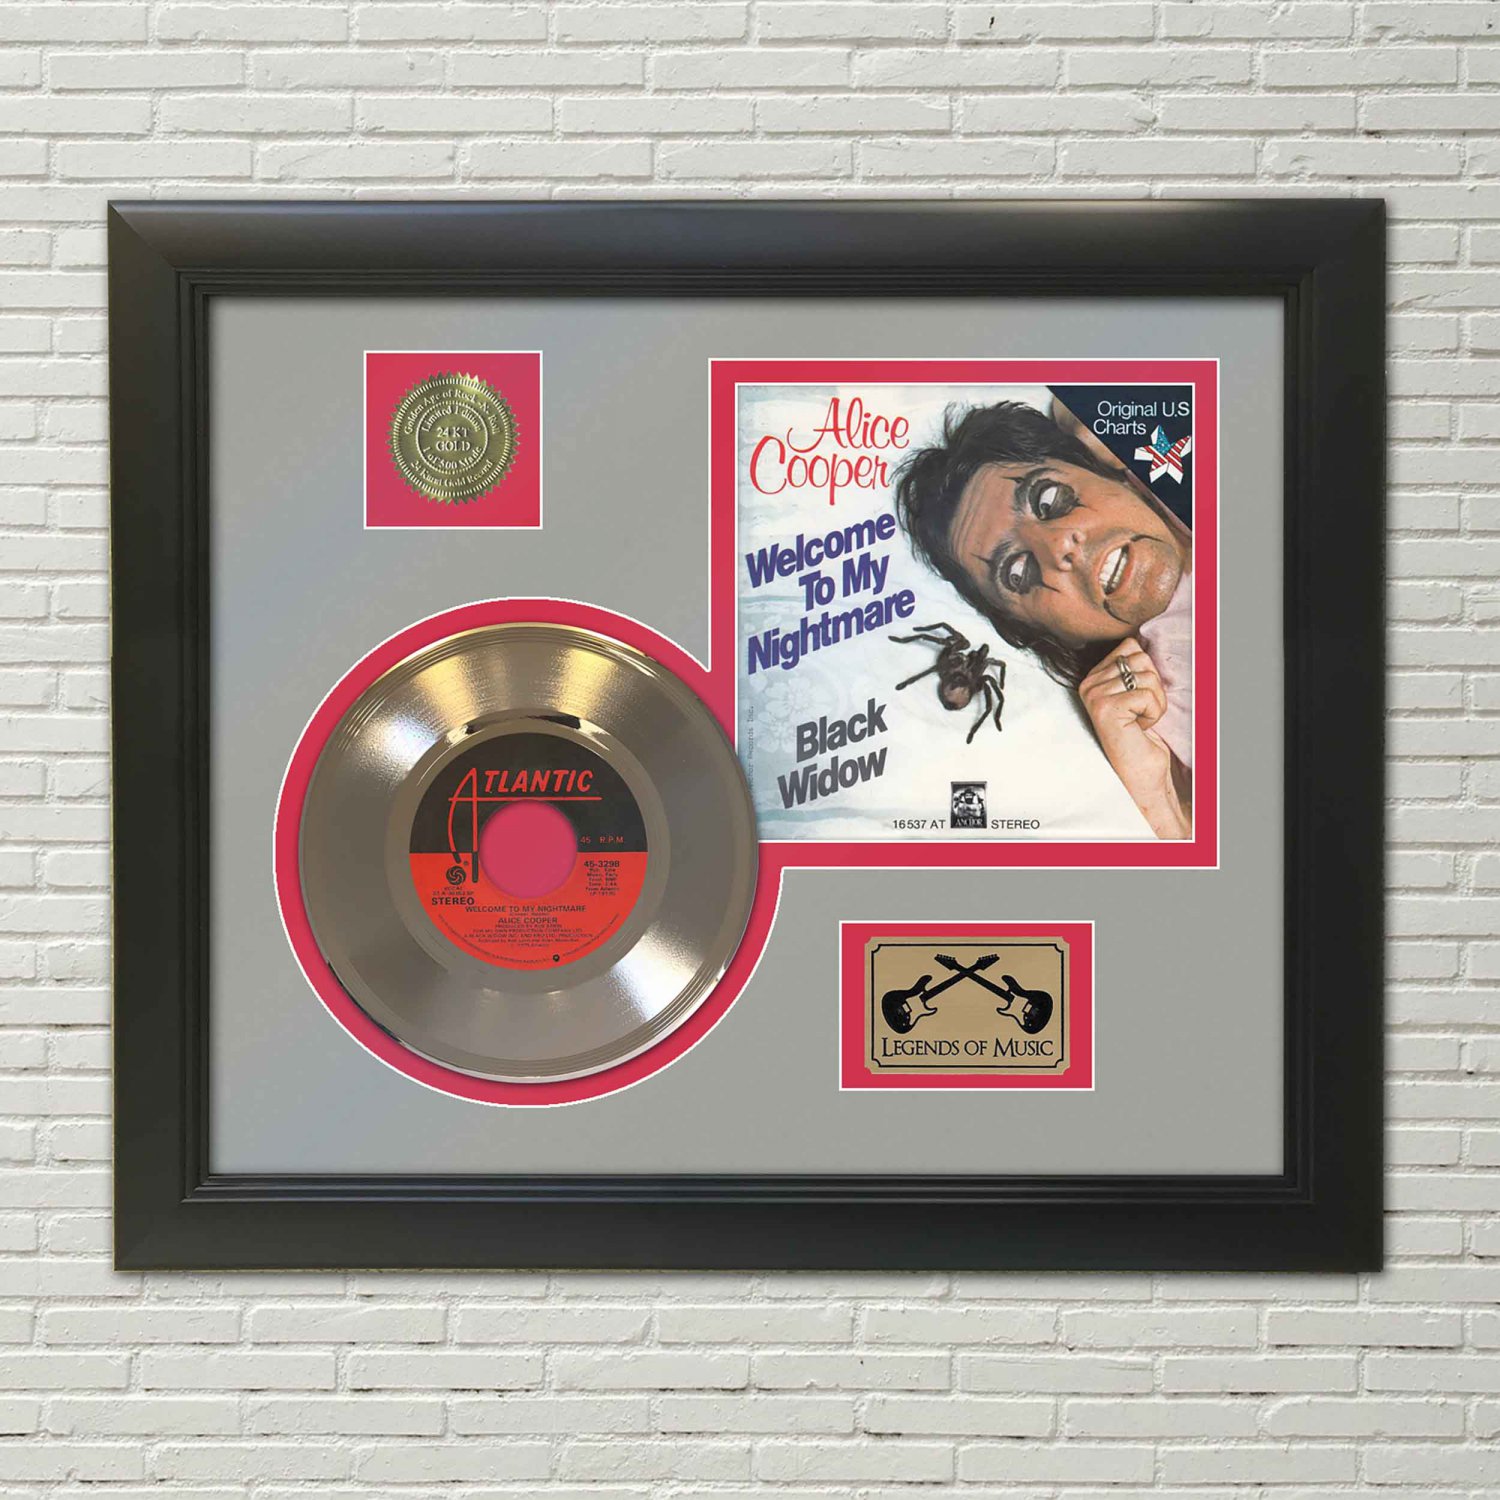 ALICE COOPER "Welcome to My Nightmare" Framed Picture Sleeve Gold 45 Record Display